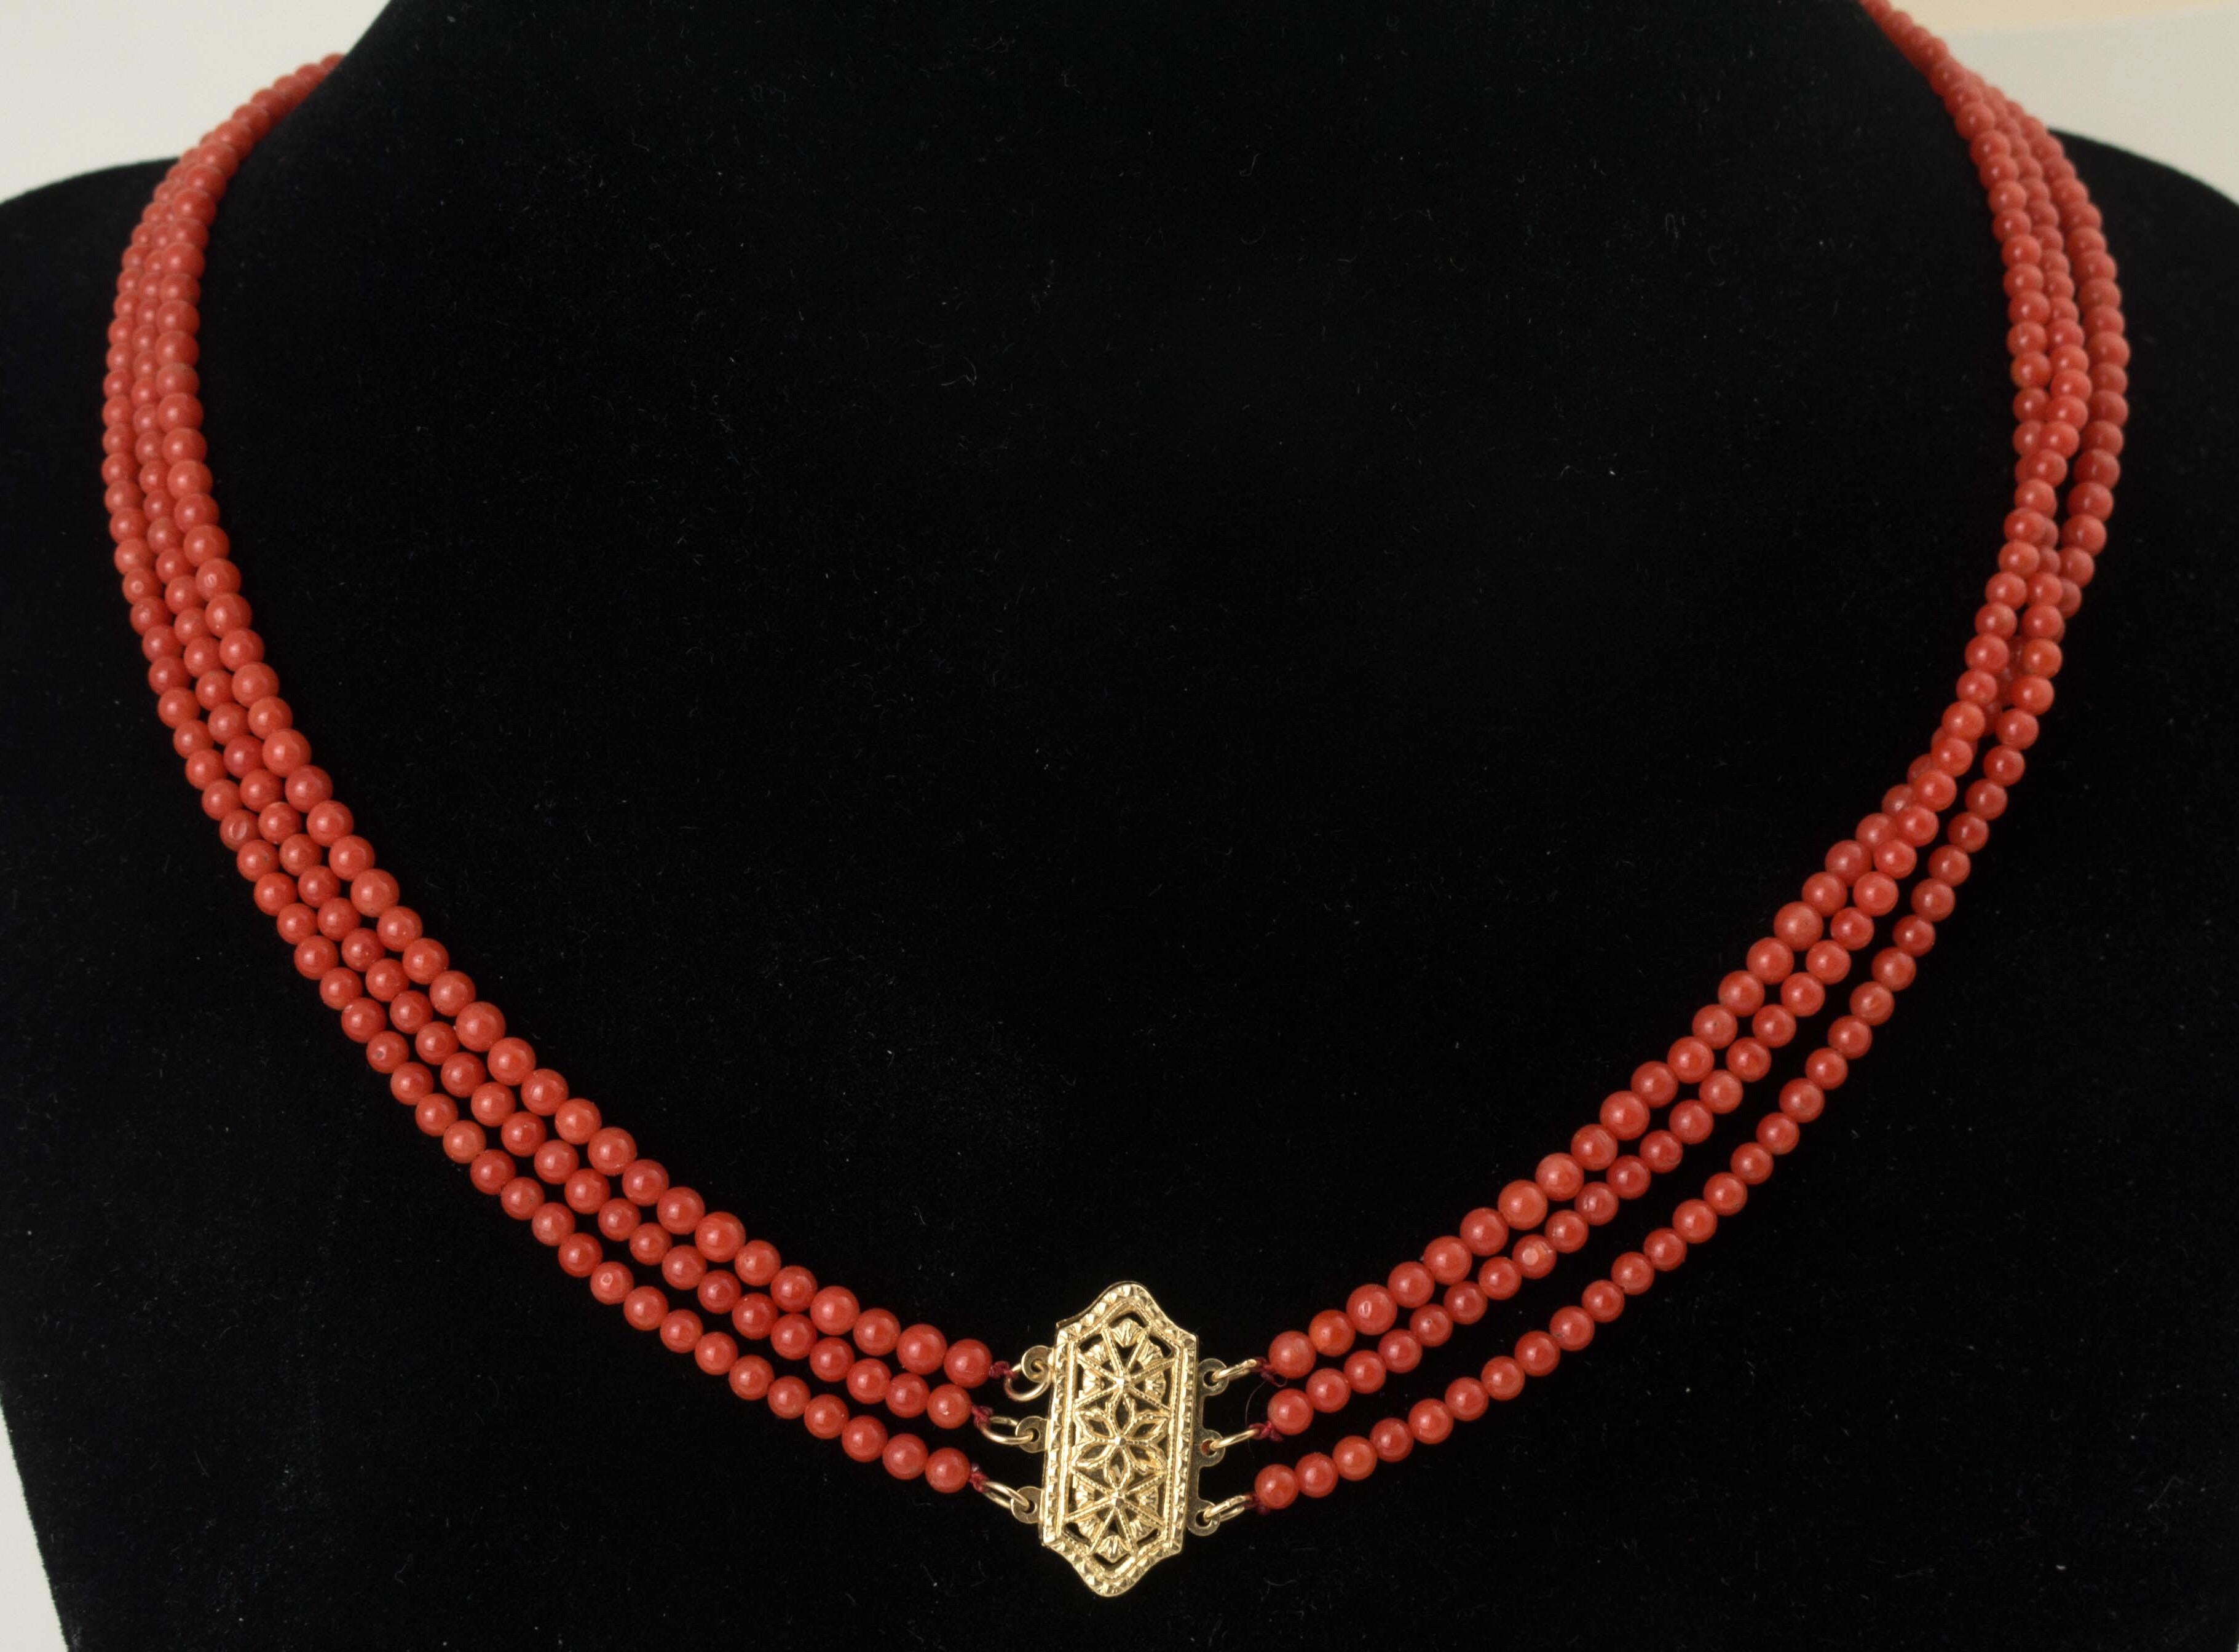 Three strands of fine beautiful round natural orange red color bead necklace with beautiful gold clasp. Beads measured approximately 3.5 mm to 4 mm. Each strand of coral beads are perfectly matched in color.
Total length including clasp is 16.5